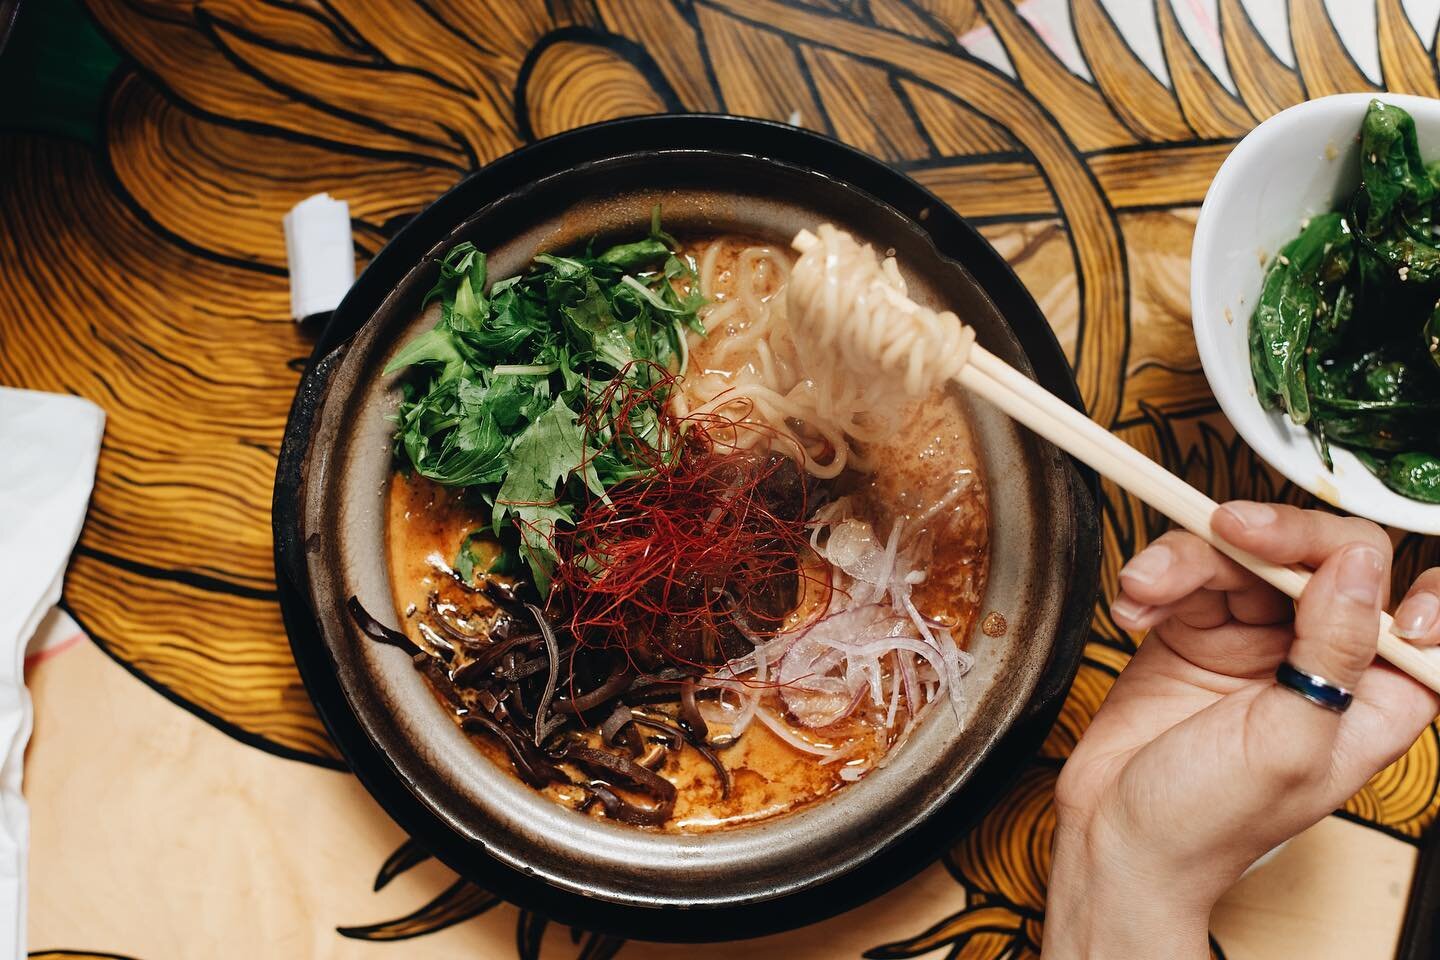 Tell me you&rsquo;re thinking about Ramen without telling me you&rsquo;re thinking about Ramen, we&rsquo;ll go first&hellip; 💭 🍜 💭 

Happy Friday 🖖🏽

Also, if you don&rsquo;t already have dinner plans tonight  hit up @orenchibeyond | watch us sl